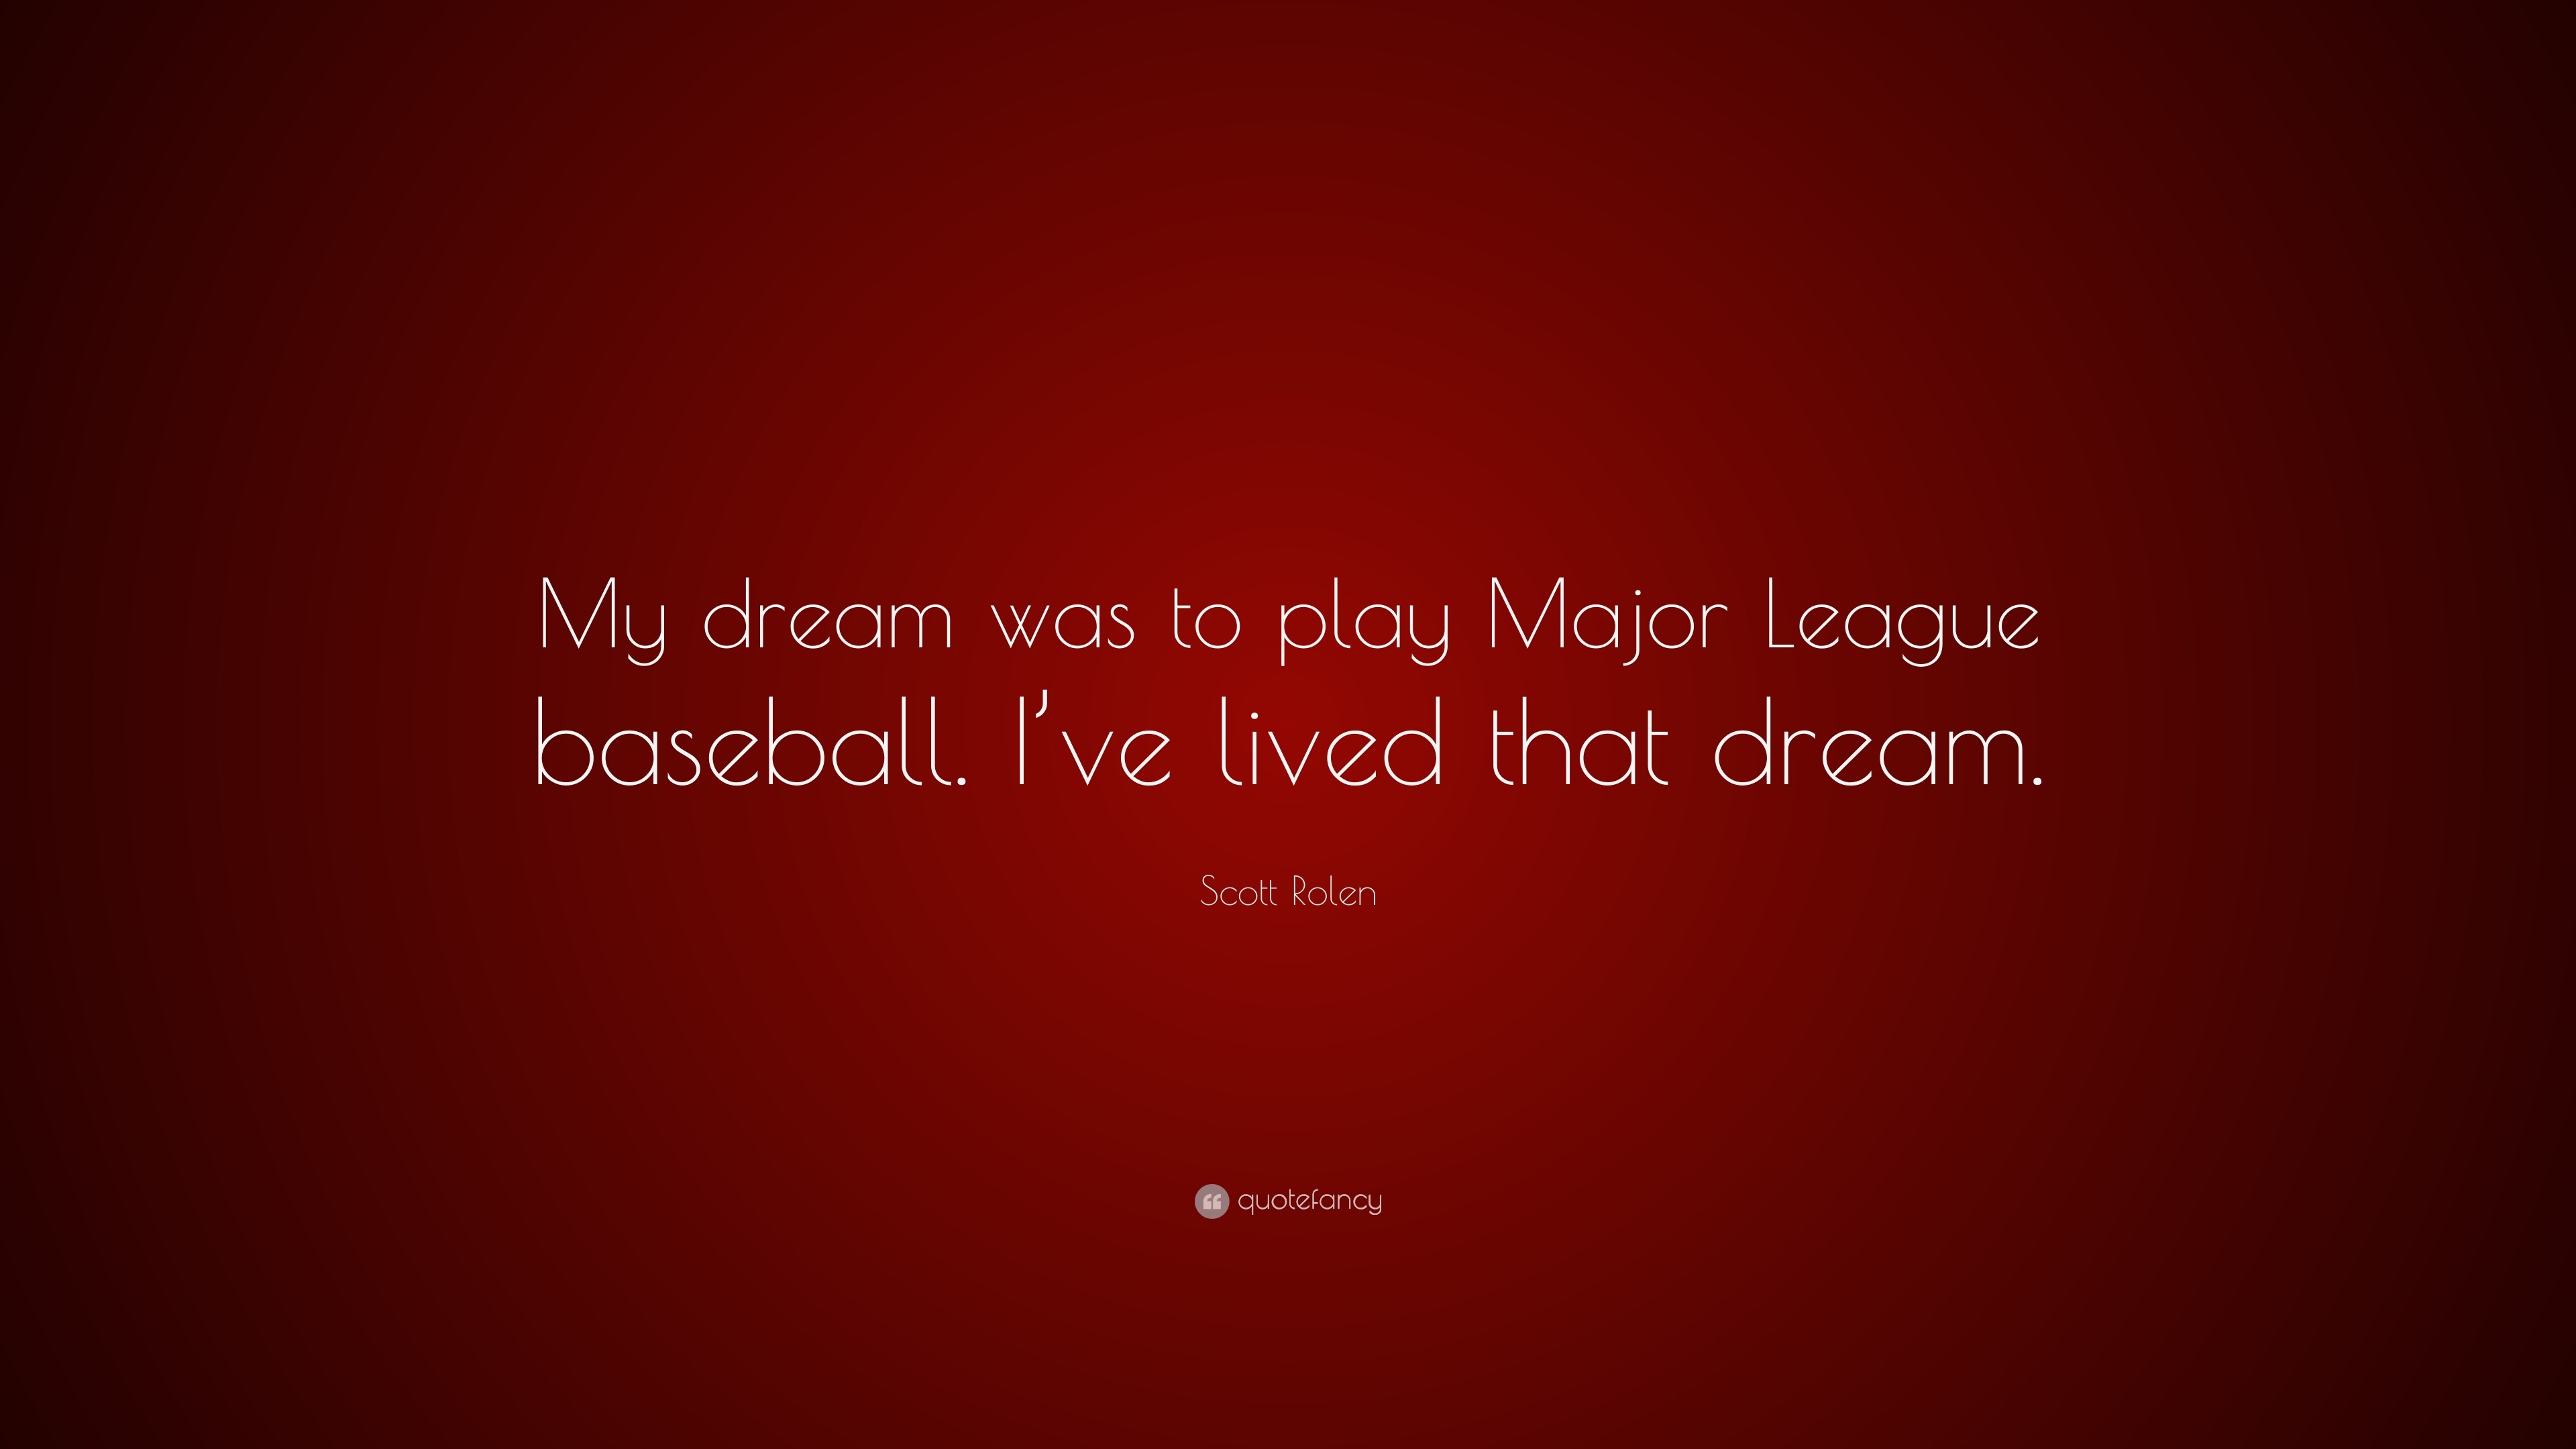 3840x2160 Scott Rolen Quote: “My dream was to play Major League baseball. I'